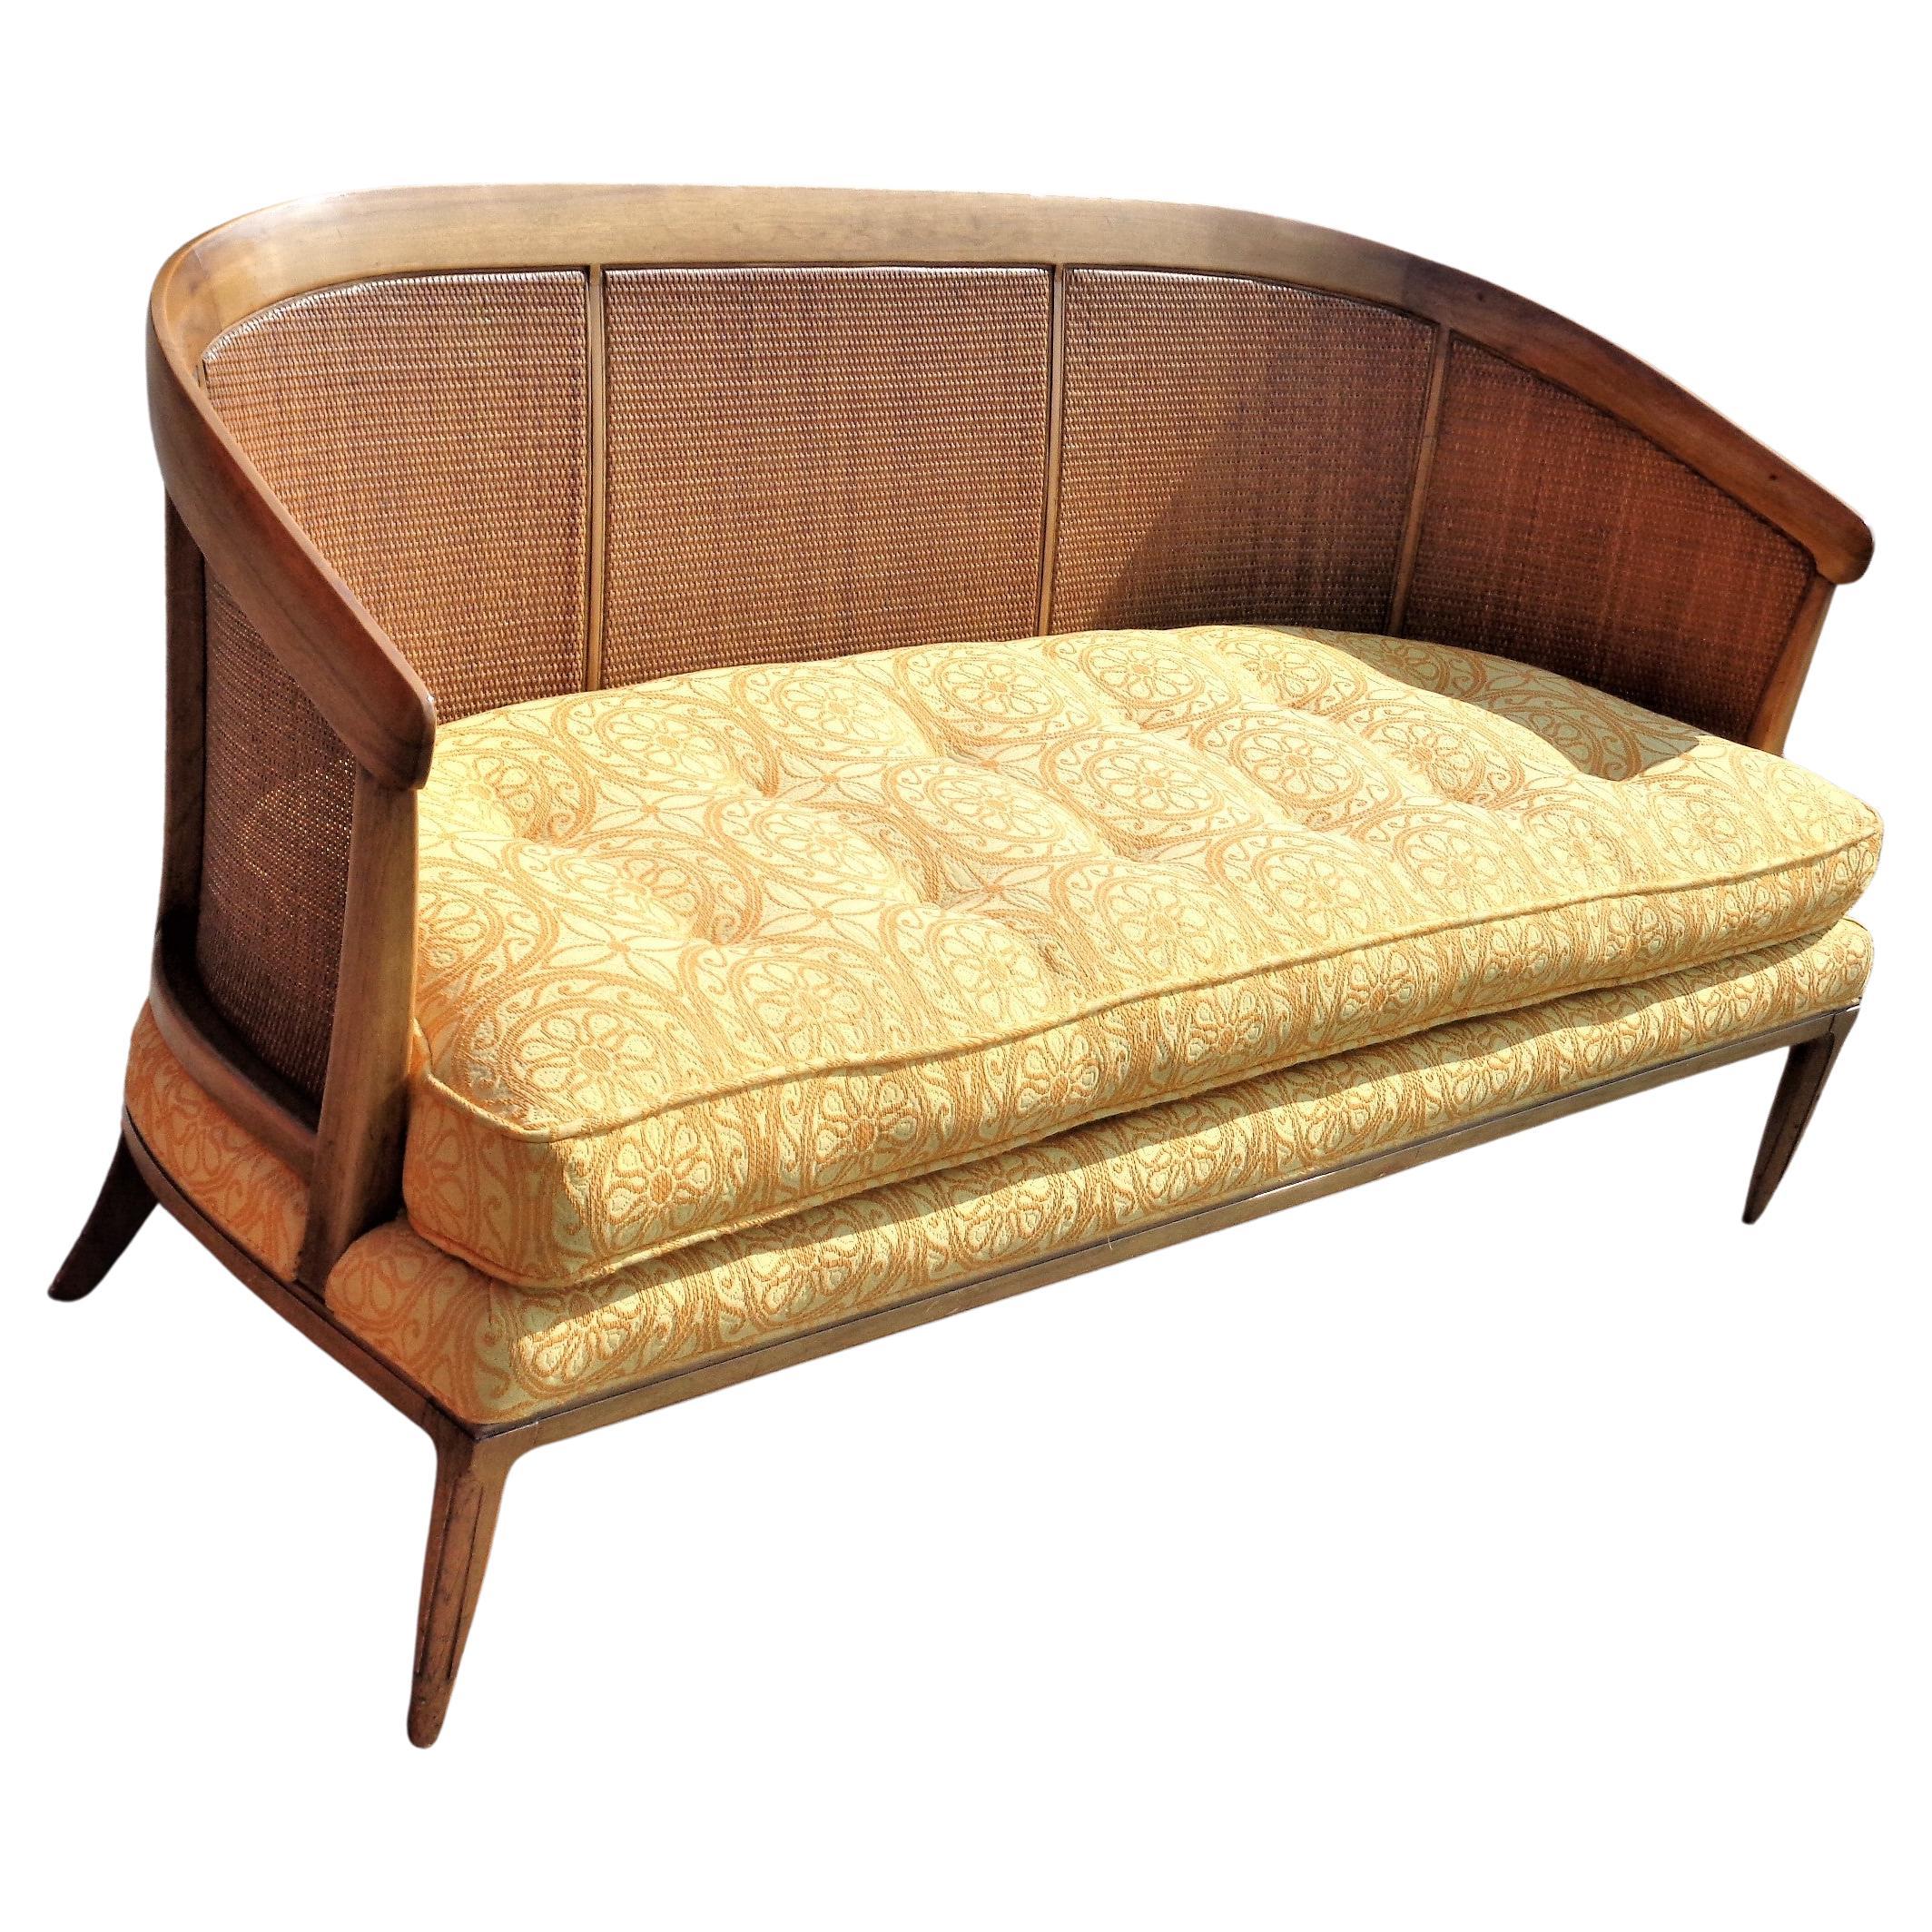  Sophisticate by Tomlinson rare cane back settee designed by John Lubberts and Lambert Mulder in all original vintage condition w/ beautiful glowing color and  button tufted upholstered loose seat cushion. All labels present ( img.8, 9 ) circa